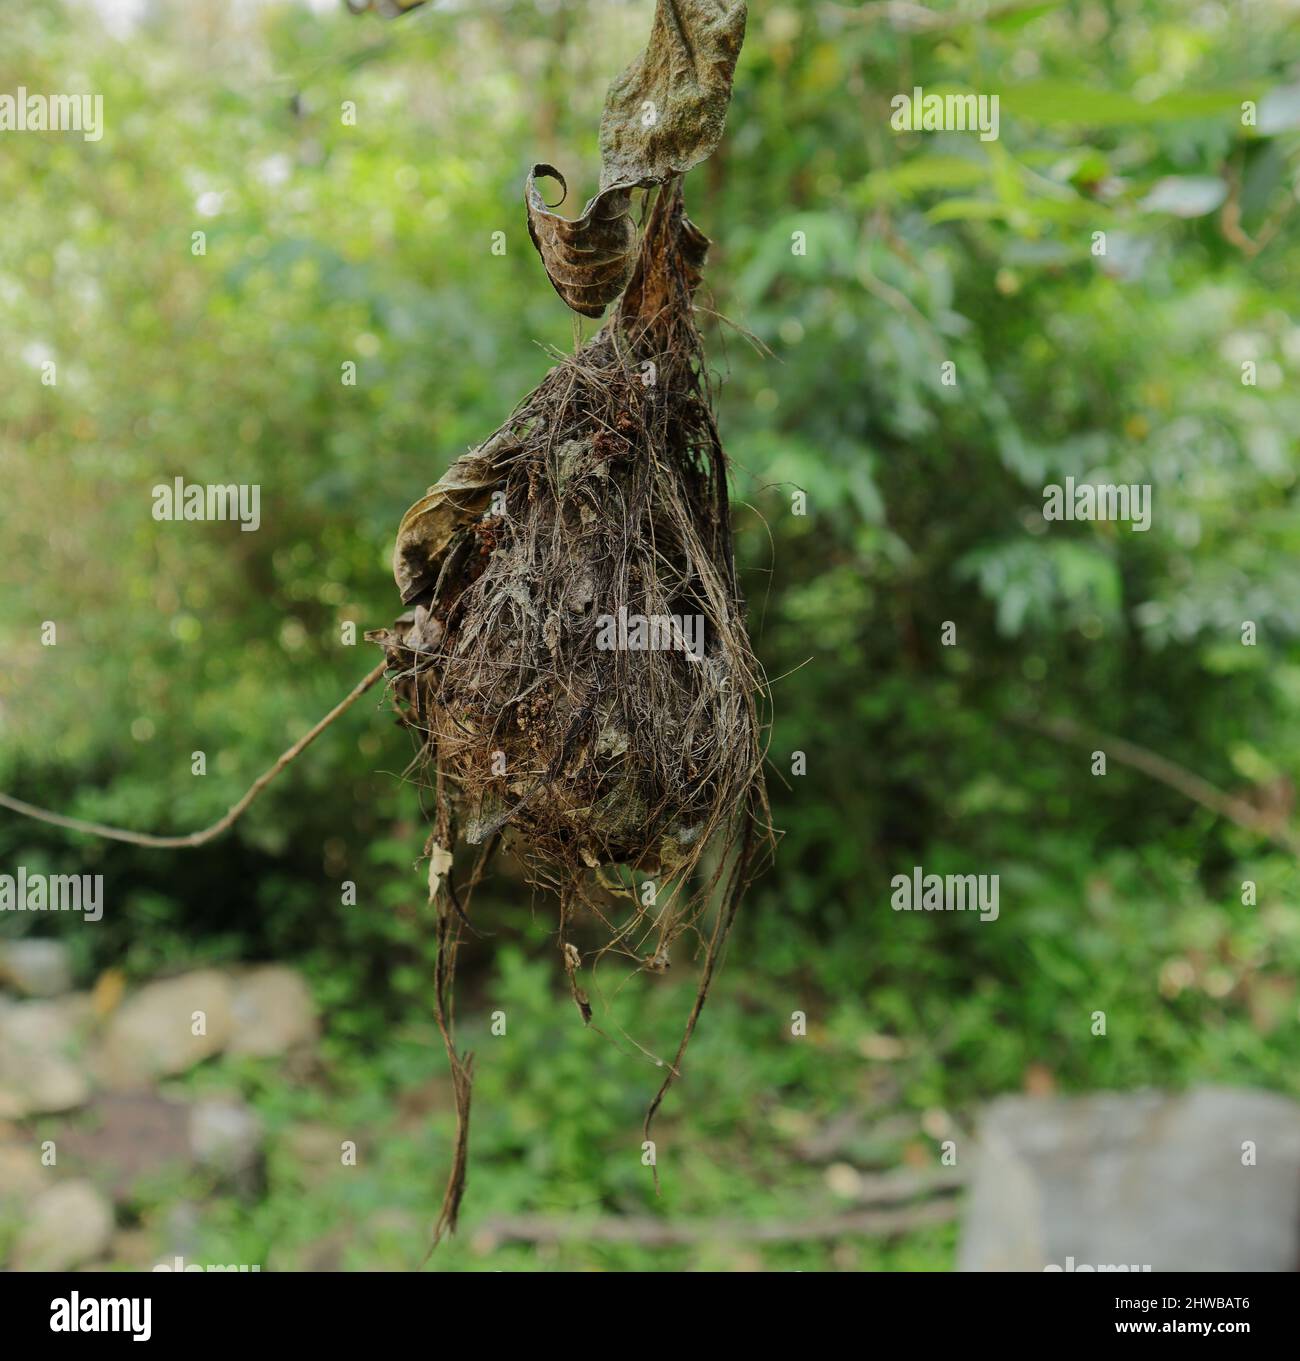 Close up of an old long billed Sunbird nest hanging on a stem in the backyard Stock Photo